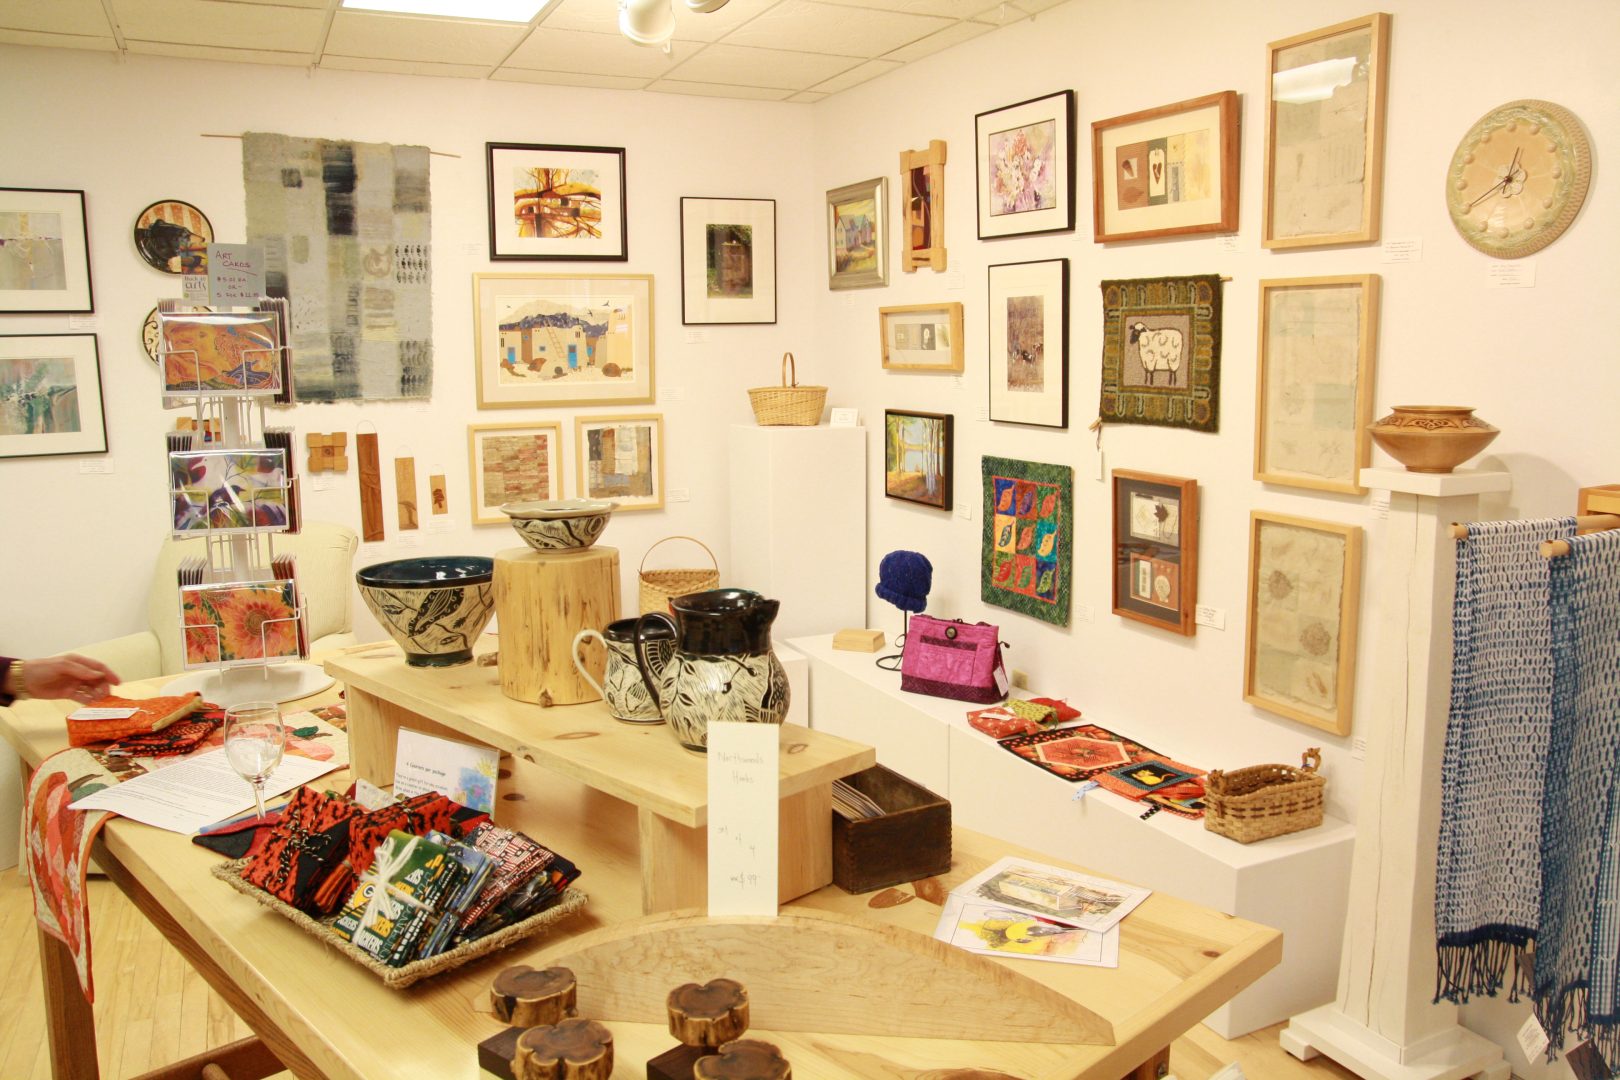 Artistree Gallery in Land O' Lakes